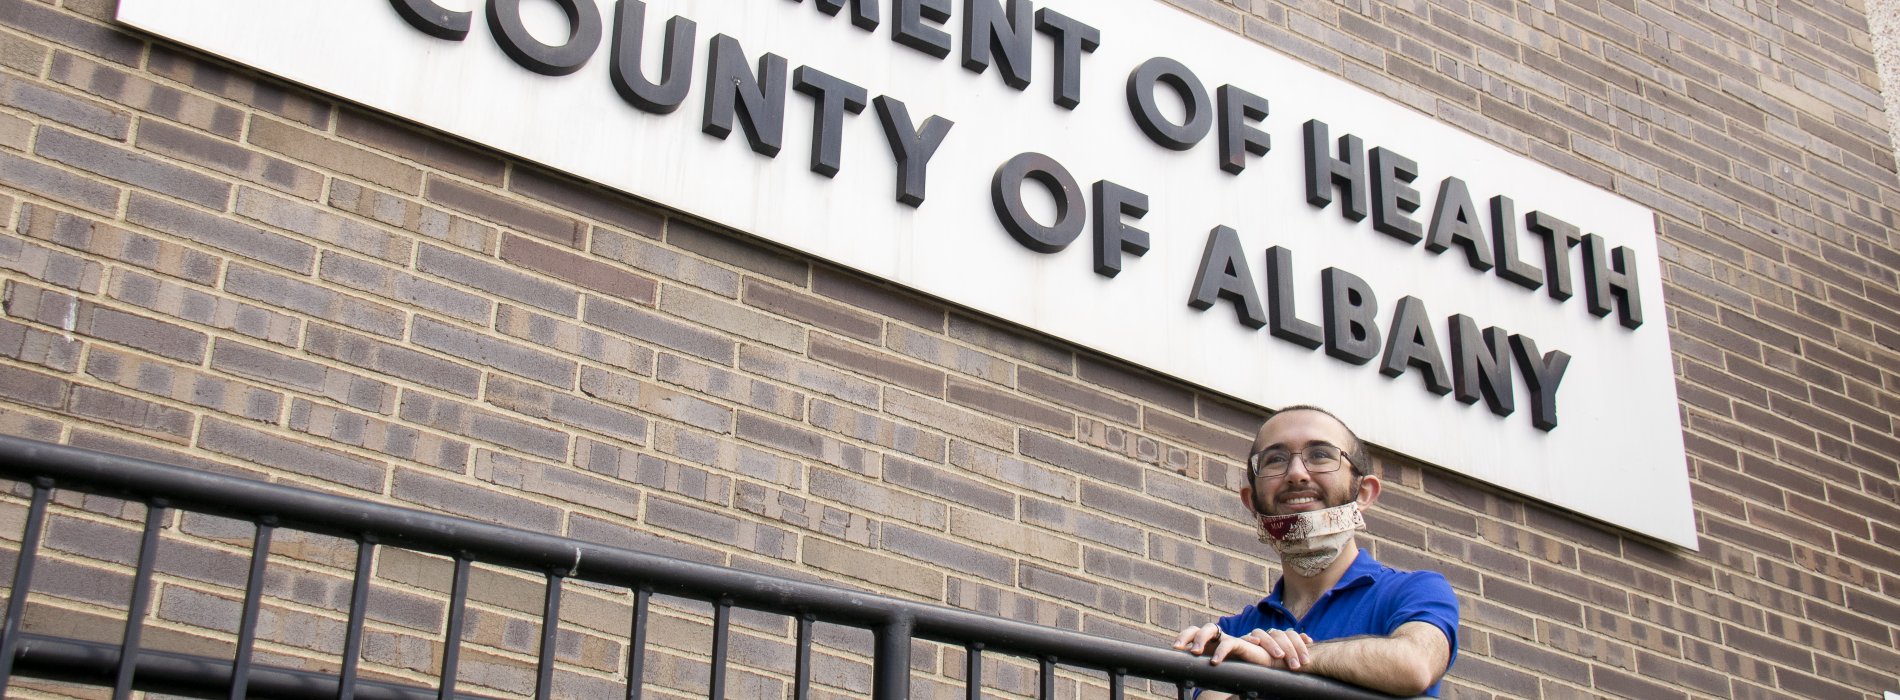 SPH Student Monroe Marshall smiles in front of the Albany County Department of Health, where he has been working as a contact tracer during the pandemic.